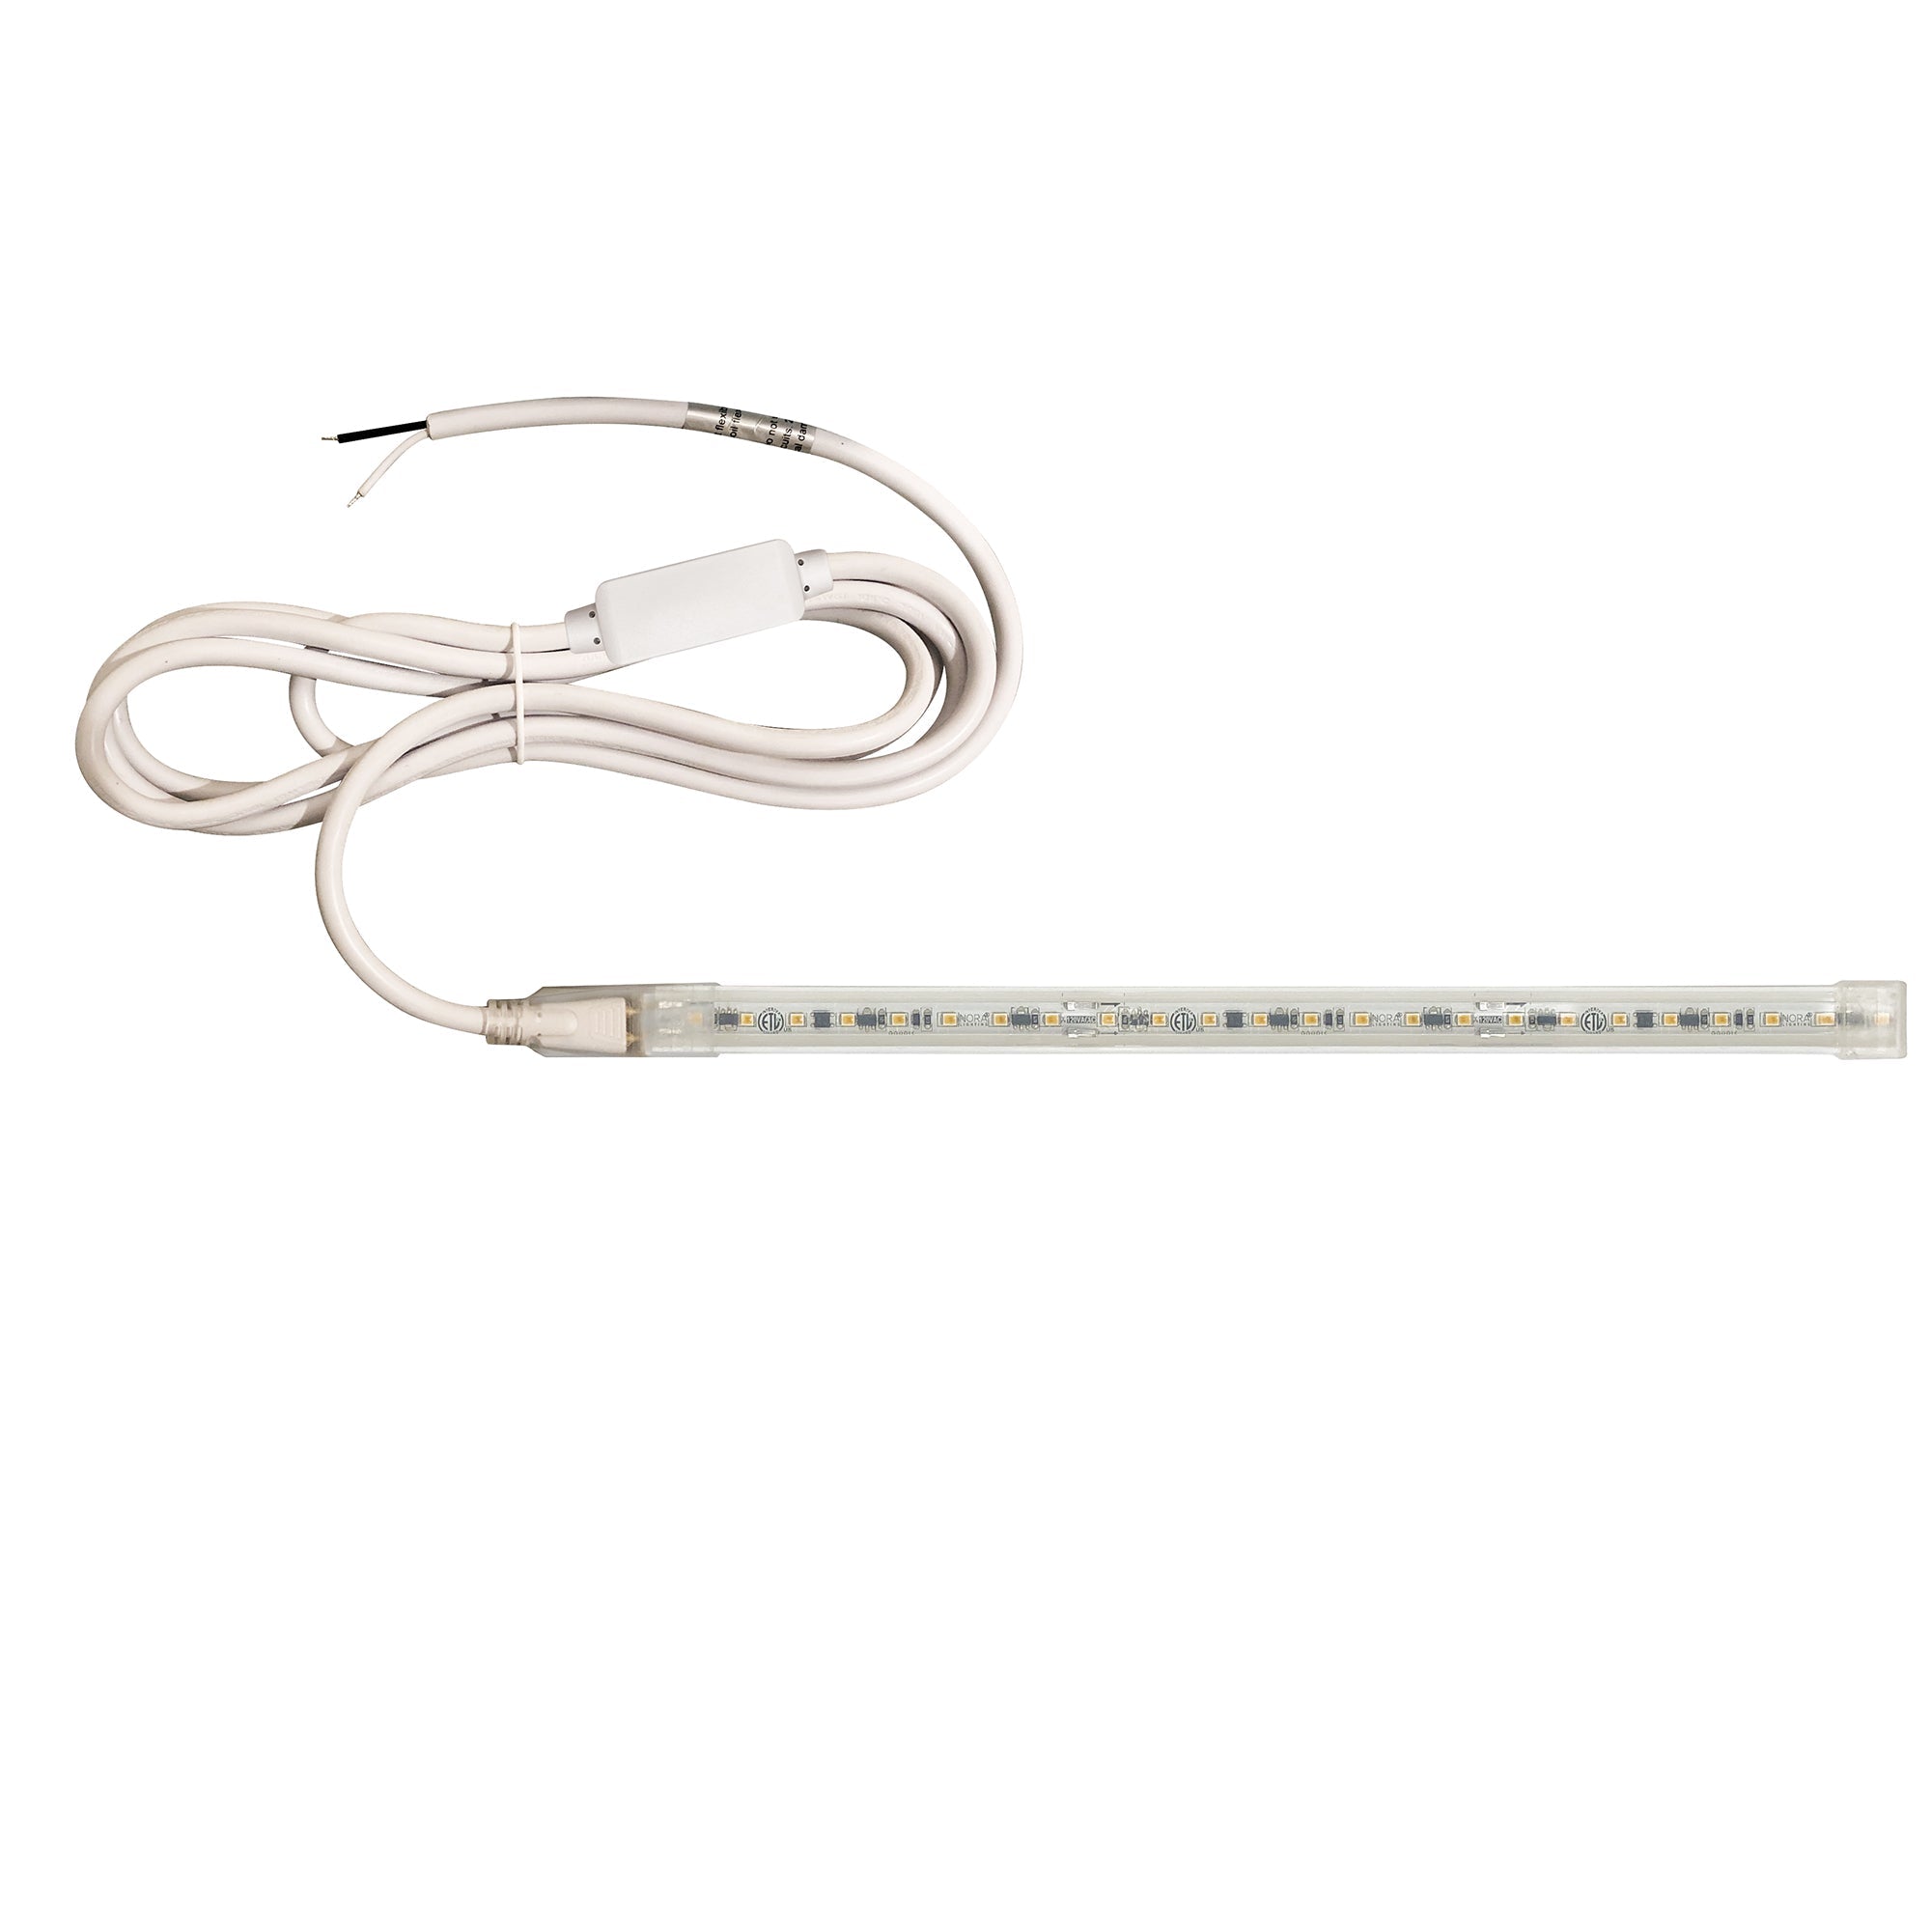 Nora Lighting NUTP13-W63-12-940/HWSP - Accent / Undercabinet - Custom Cut 63-ft 120V Continuous LED Tape Light, 330lm / 3.6W per foot, 4000K, w/ Mounting Clips and 8' Hardwired Power Cord w/ Surge Protector